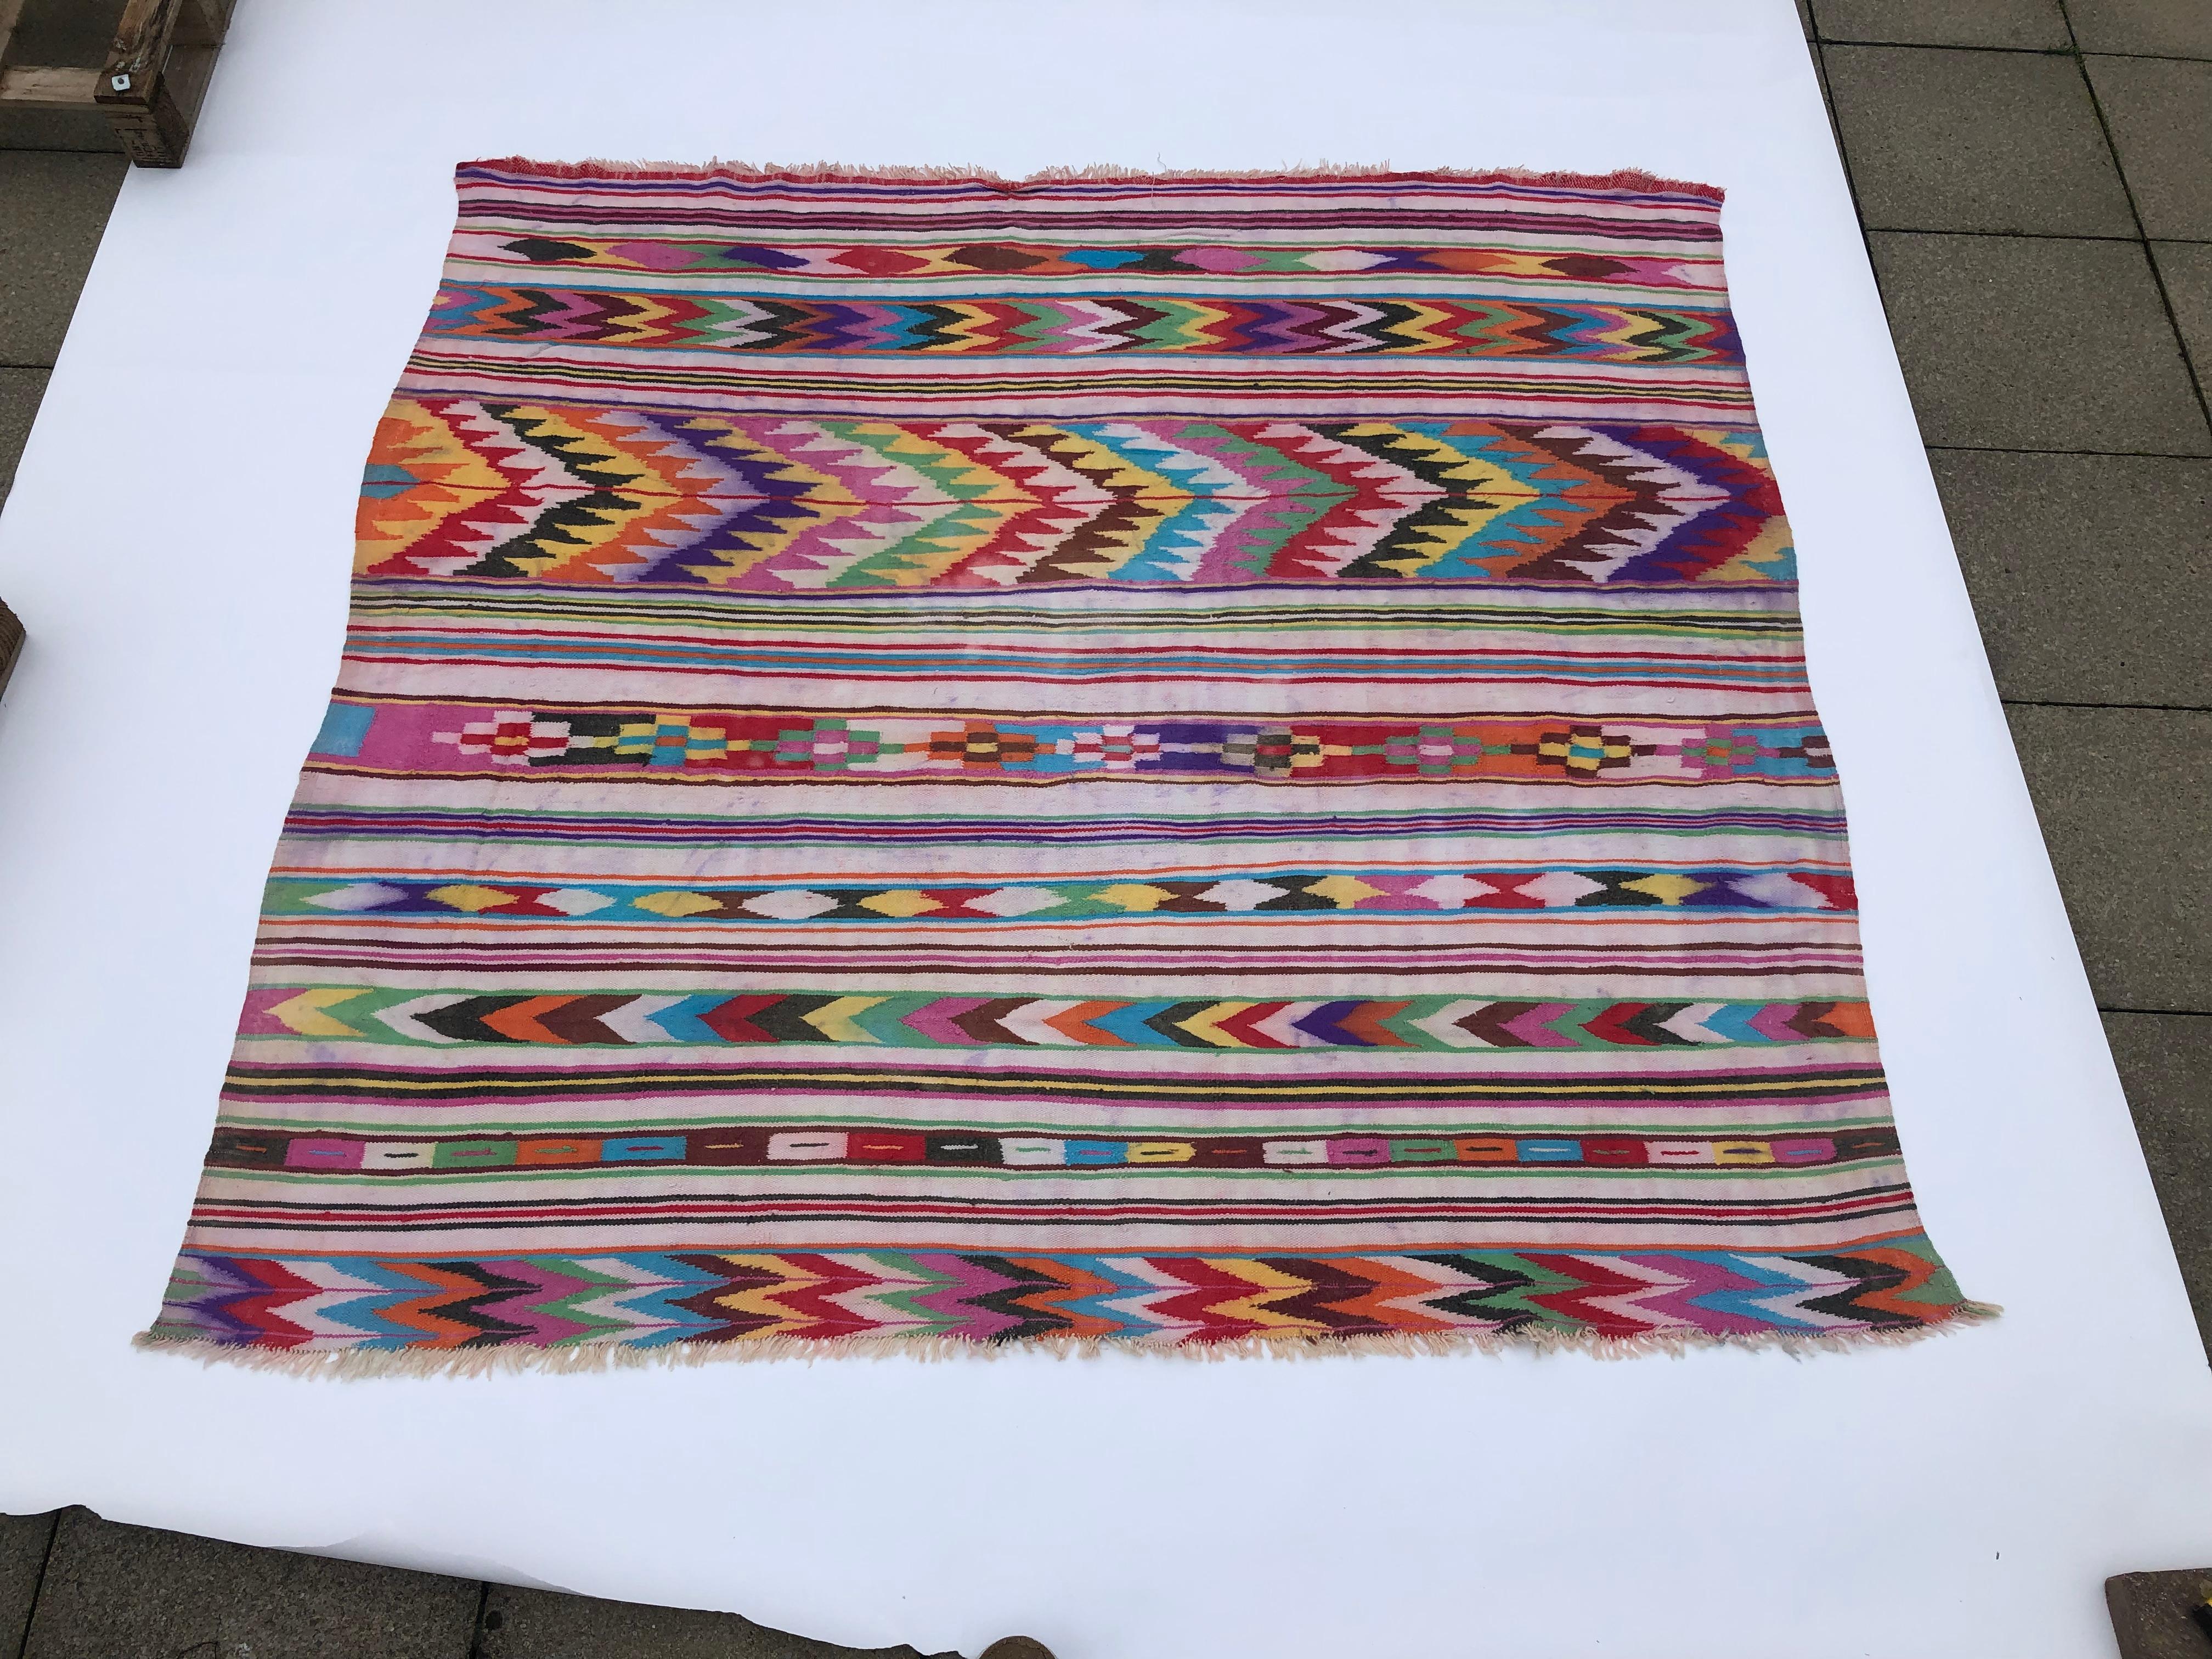 A unique algerian berber rug with a multicolored pattern consisting of zigzags, lines, and diamond shapes. This handwoven rug is using traditional techniques by Berber Kabyle tribes in the northern part of Algeria. Each rug is one of a kind, with